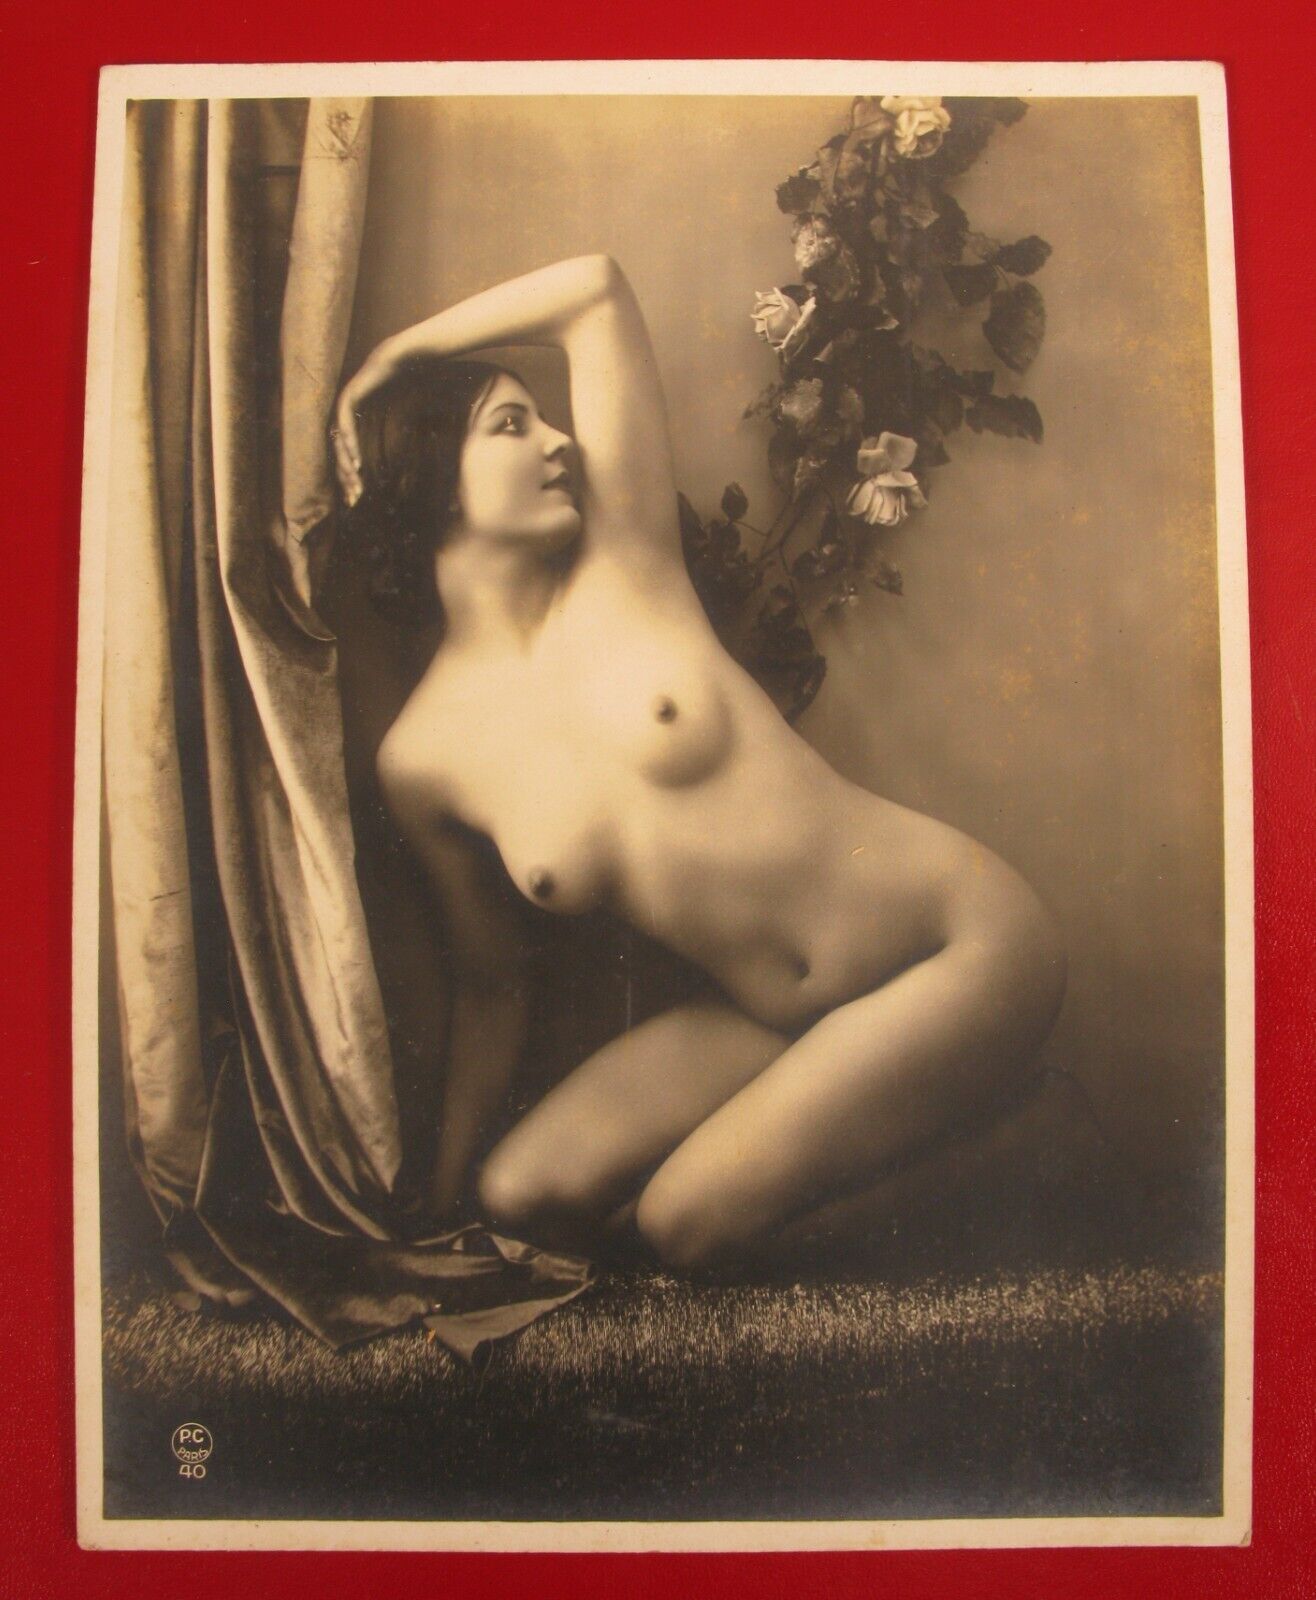 VINTAGE 1920's PHOTOGRAPH FEMALE SEXY NYMPH ROSES SENSUAL RISQUE FABULOUS 